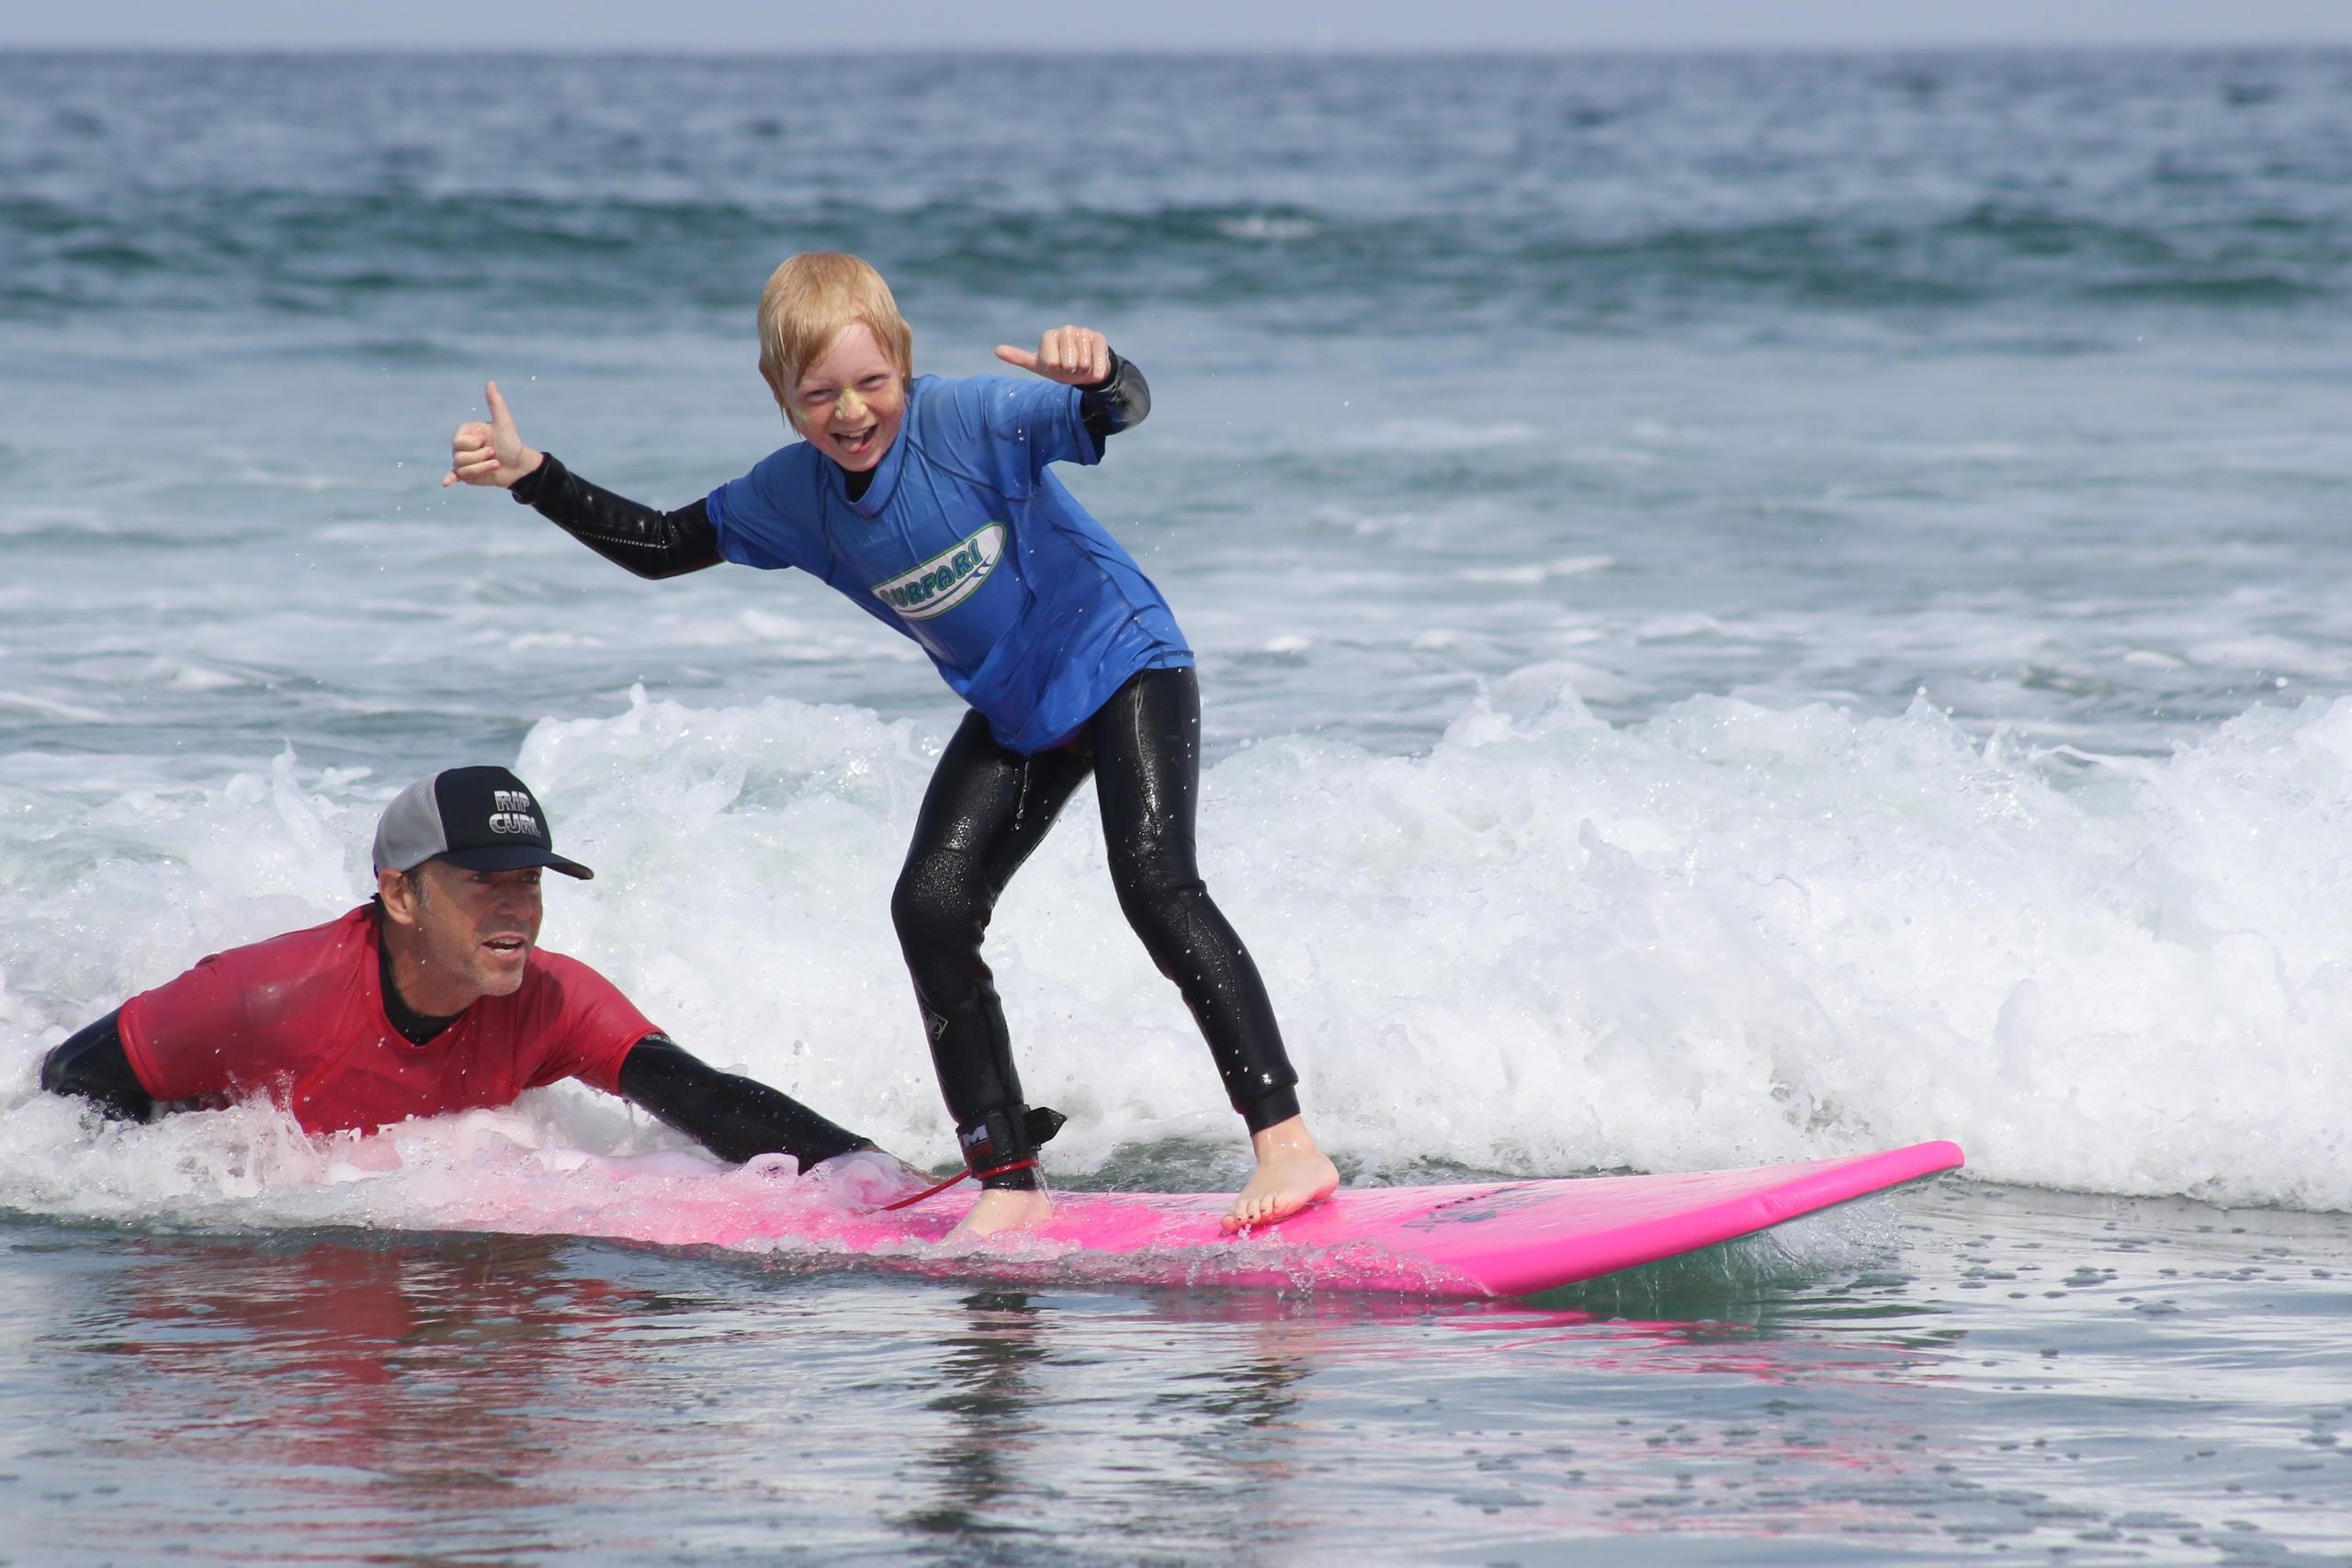 Surfing lessons in San Diego